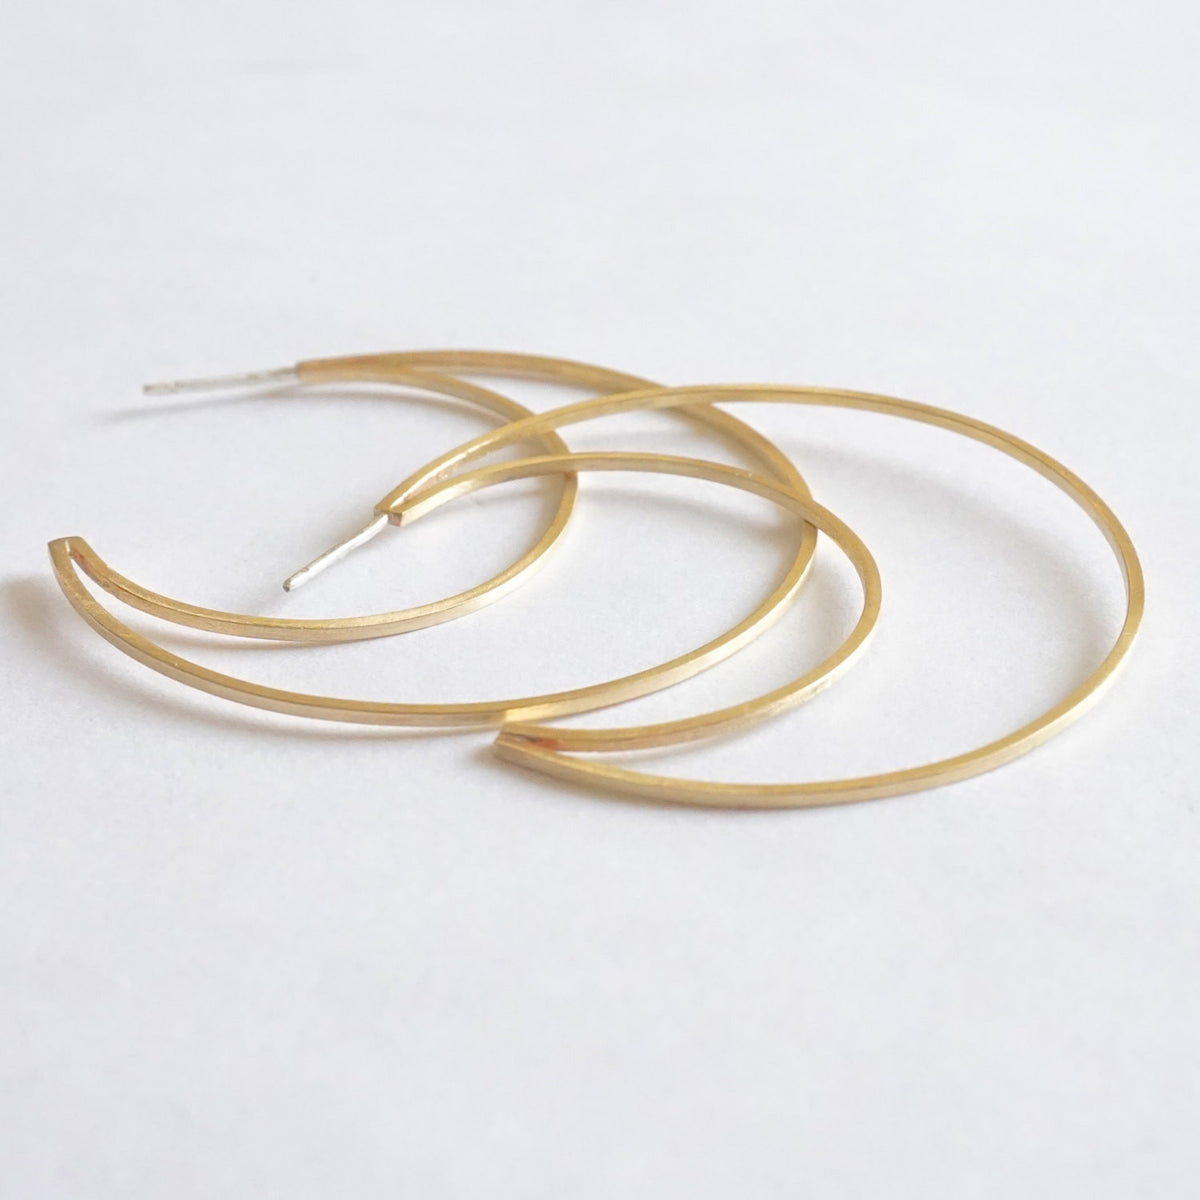 Contemporary, Hand-Crafted, Open Flat Crescent Hoop Earrings With Brushed Finish - 0261 - Virginia Wynne Designs